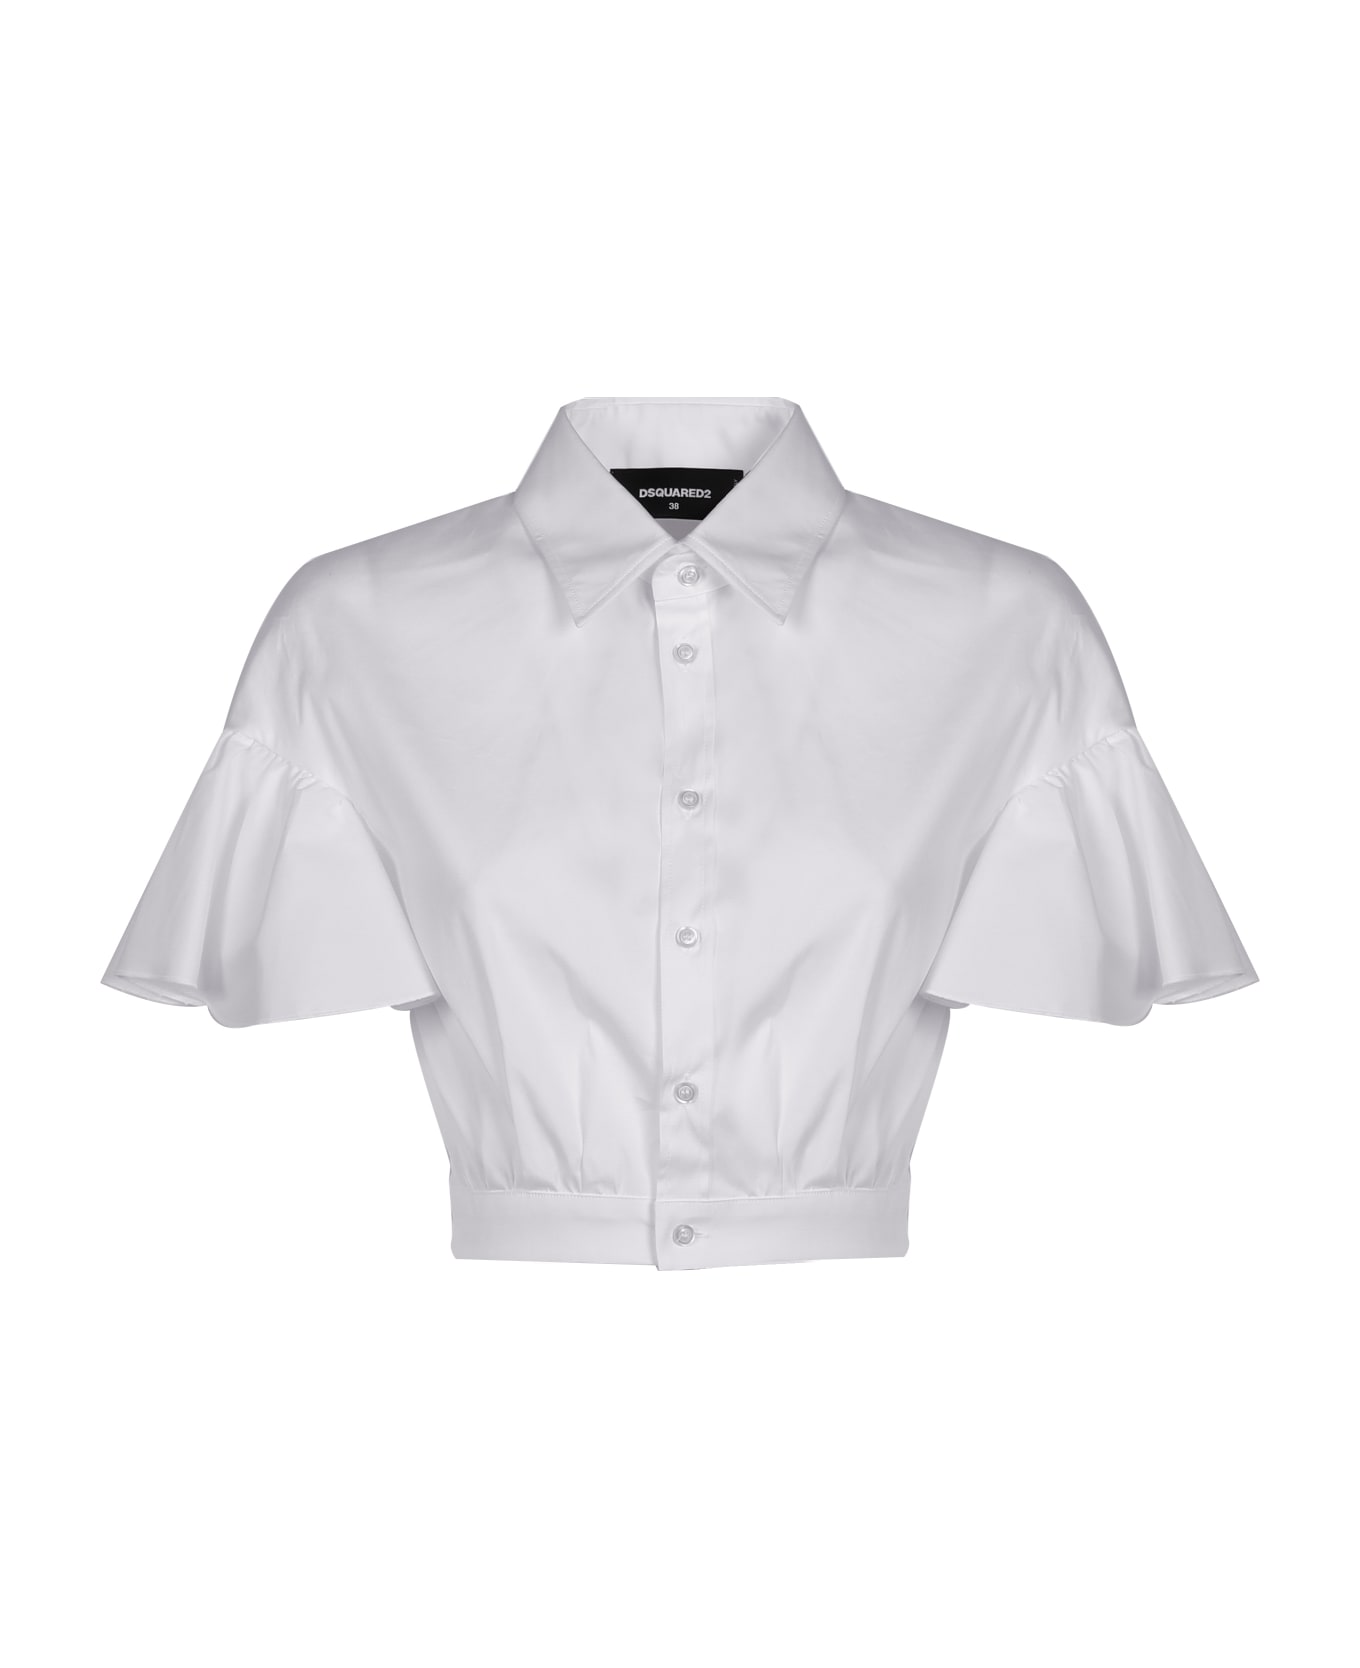 Dsquared2 Cropped Shirt - White